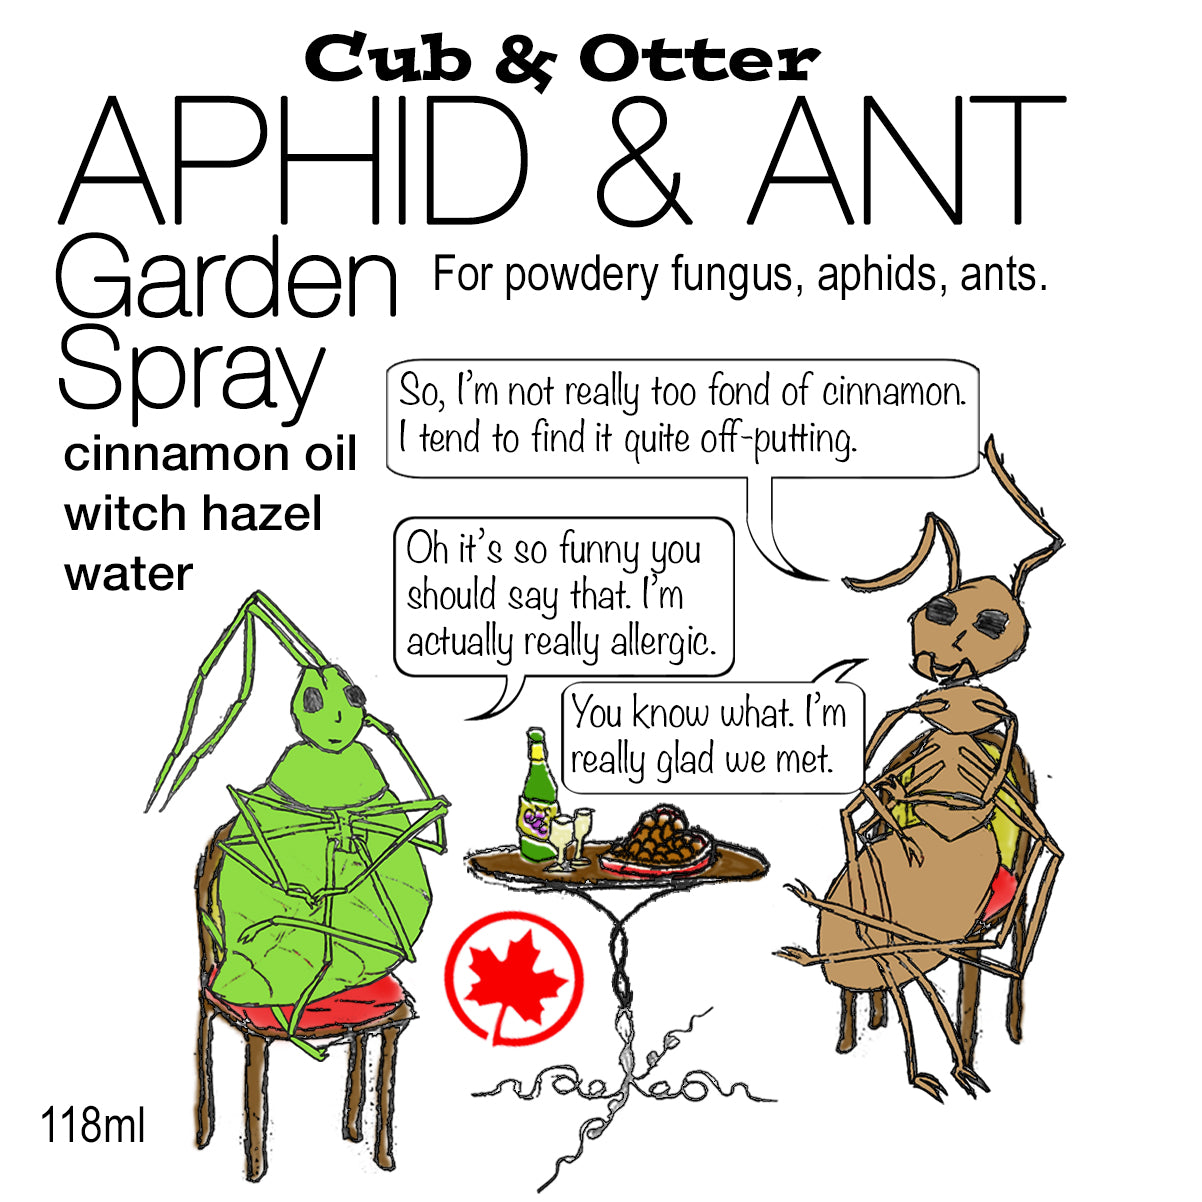 Aphid and Ant Garden Spray 118ml Cinnamon